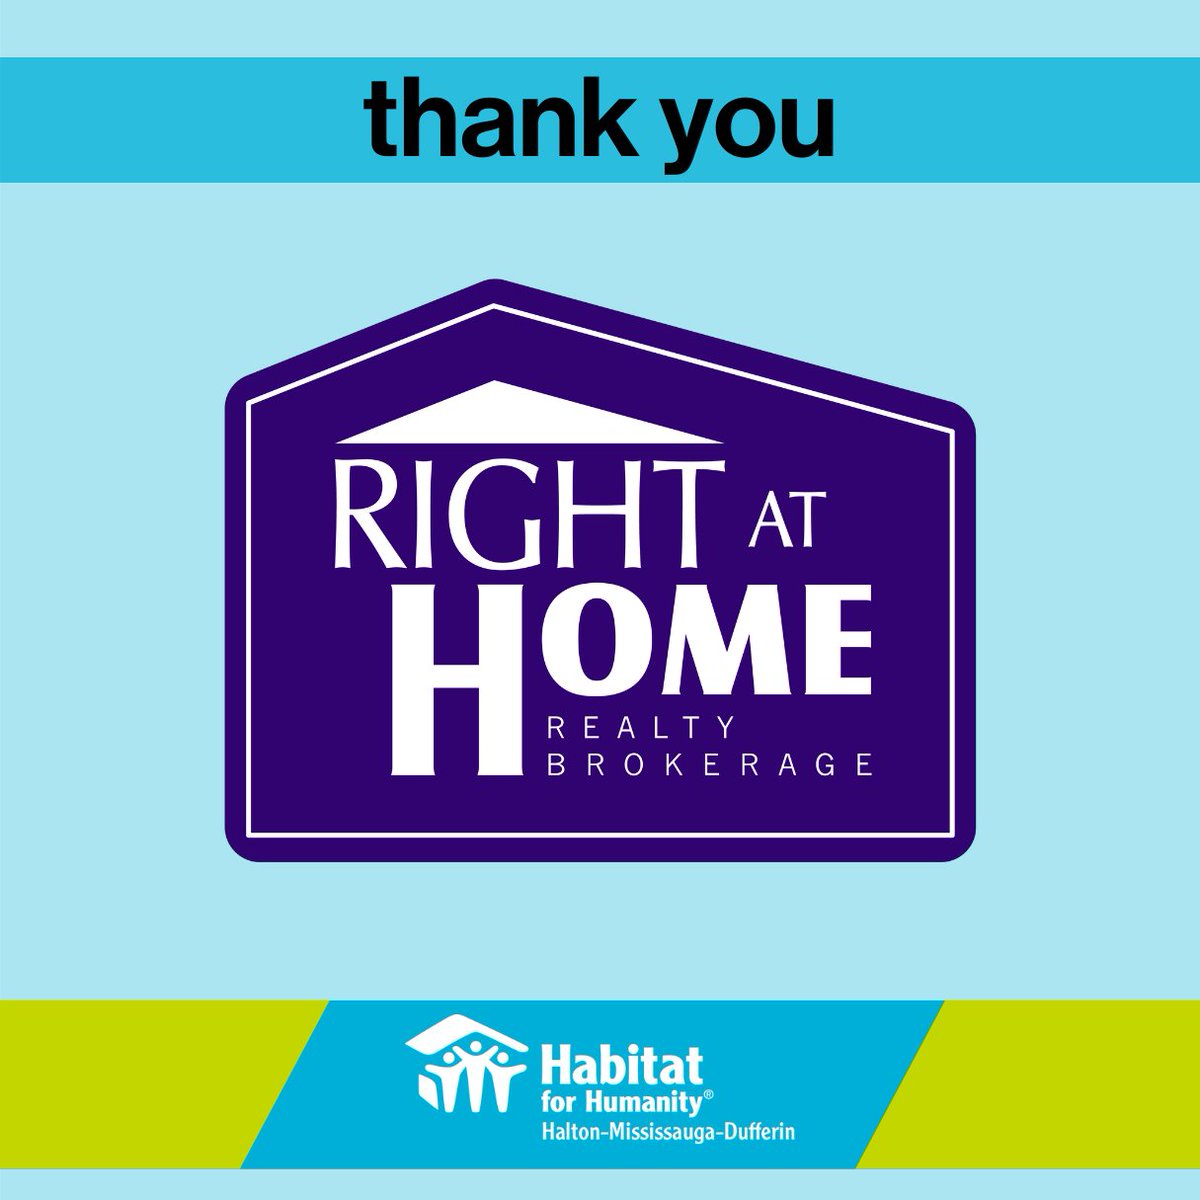 Today, your donation will make a difference, thanks to the generosity of Right At Home Realty. They have boosted the campaign with an additional donation of $3,500!! Donate today: habitathm.ca/donate #HabitatHMD #SpringGiving #GiveToday #DoubleImpact